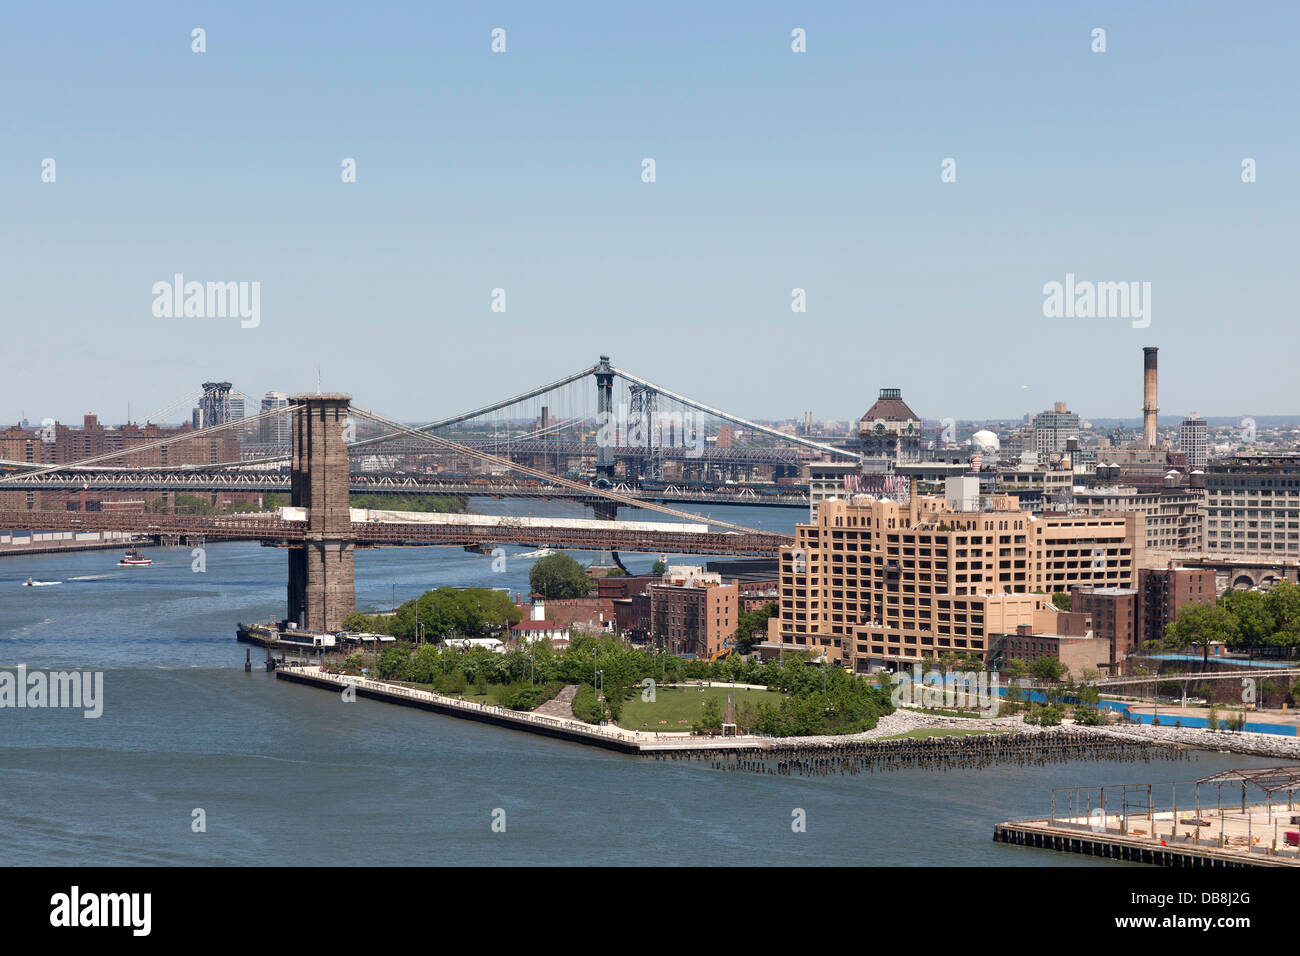 Aerial view of the East River with the Brooklyn Bridge and Williamsburg Bridge, New York City Stock Photo